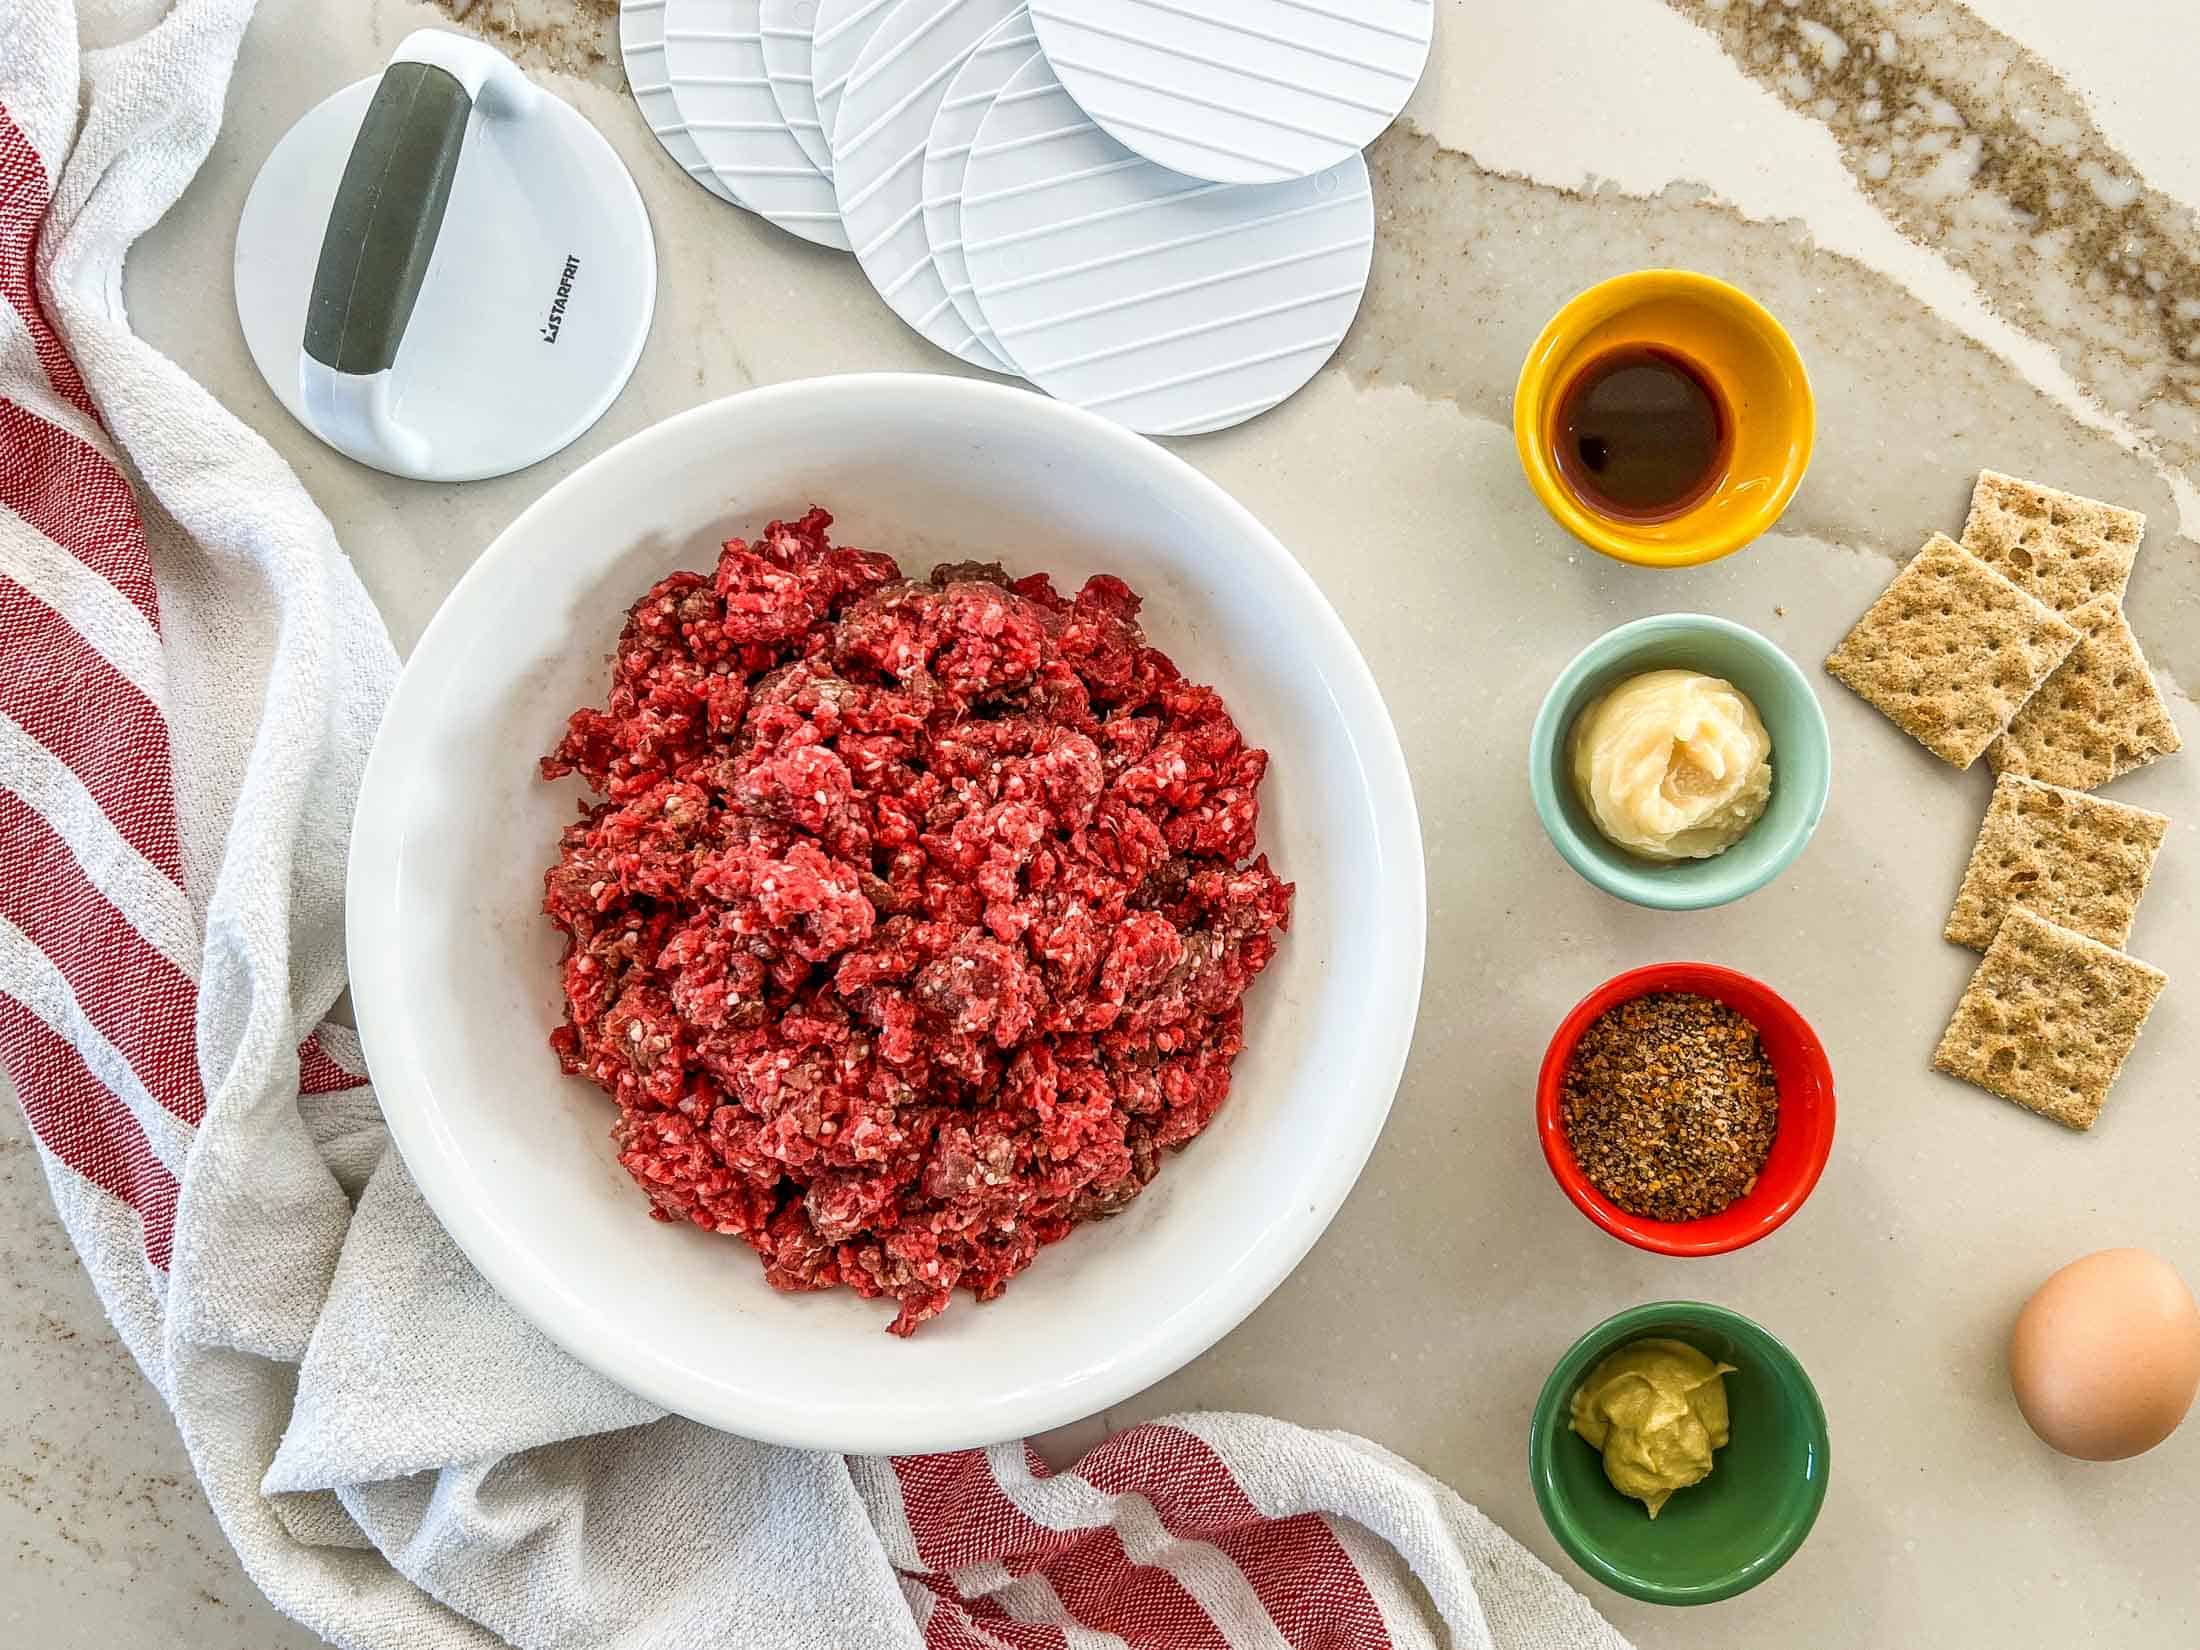 Key ingredients for venison burgers including ground deer meat, lard, steak spice, dijon mustard, Worcestershire sauce, crackers, and an egg.